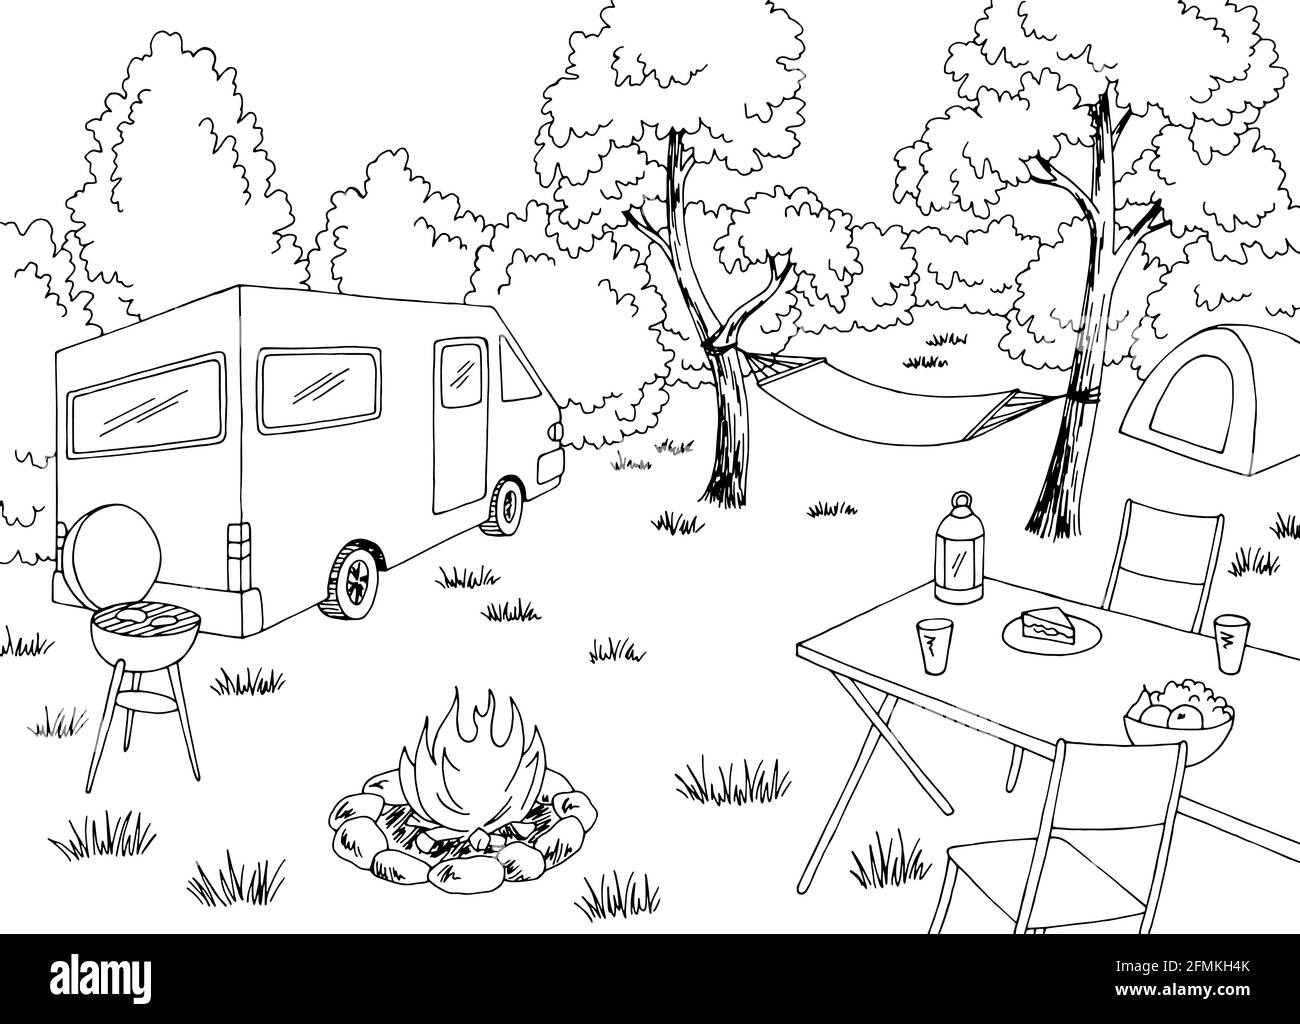 Camping graphic black white mountain landscape sketch illustration vector Stock Vector